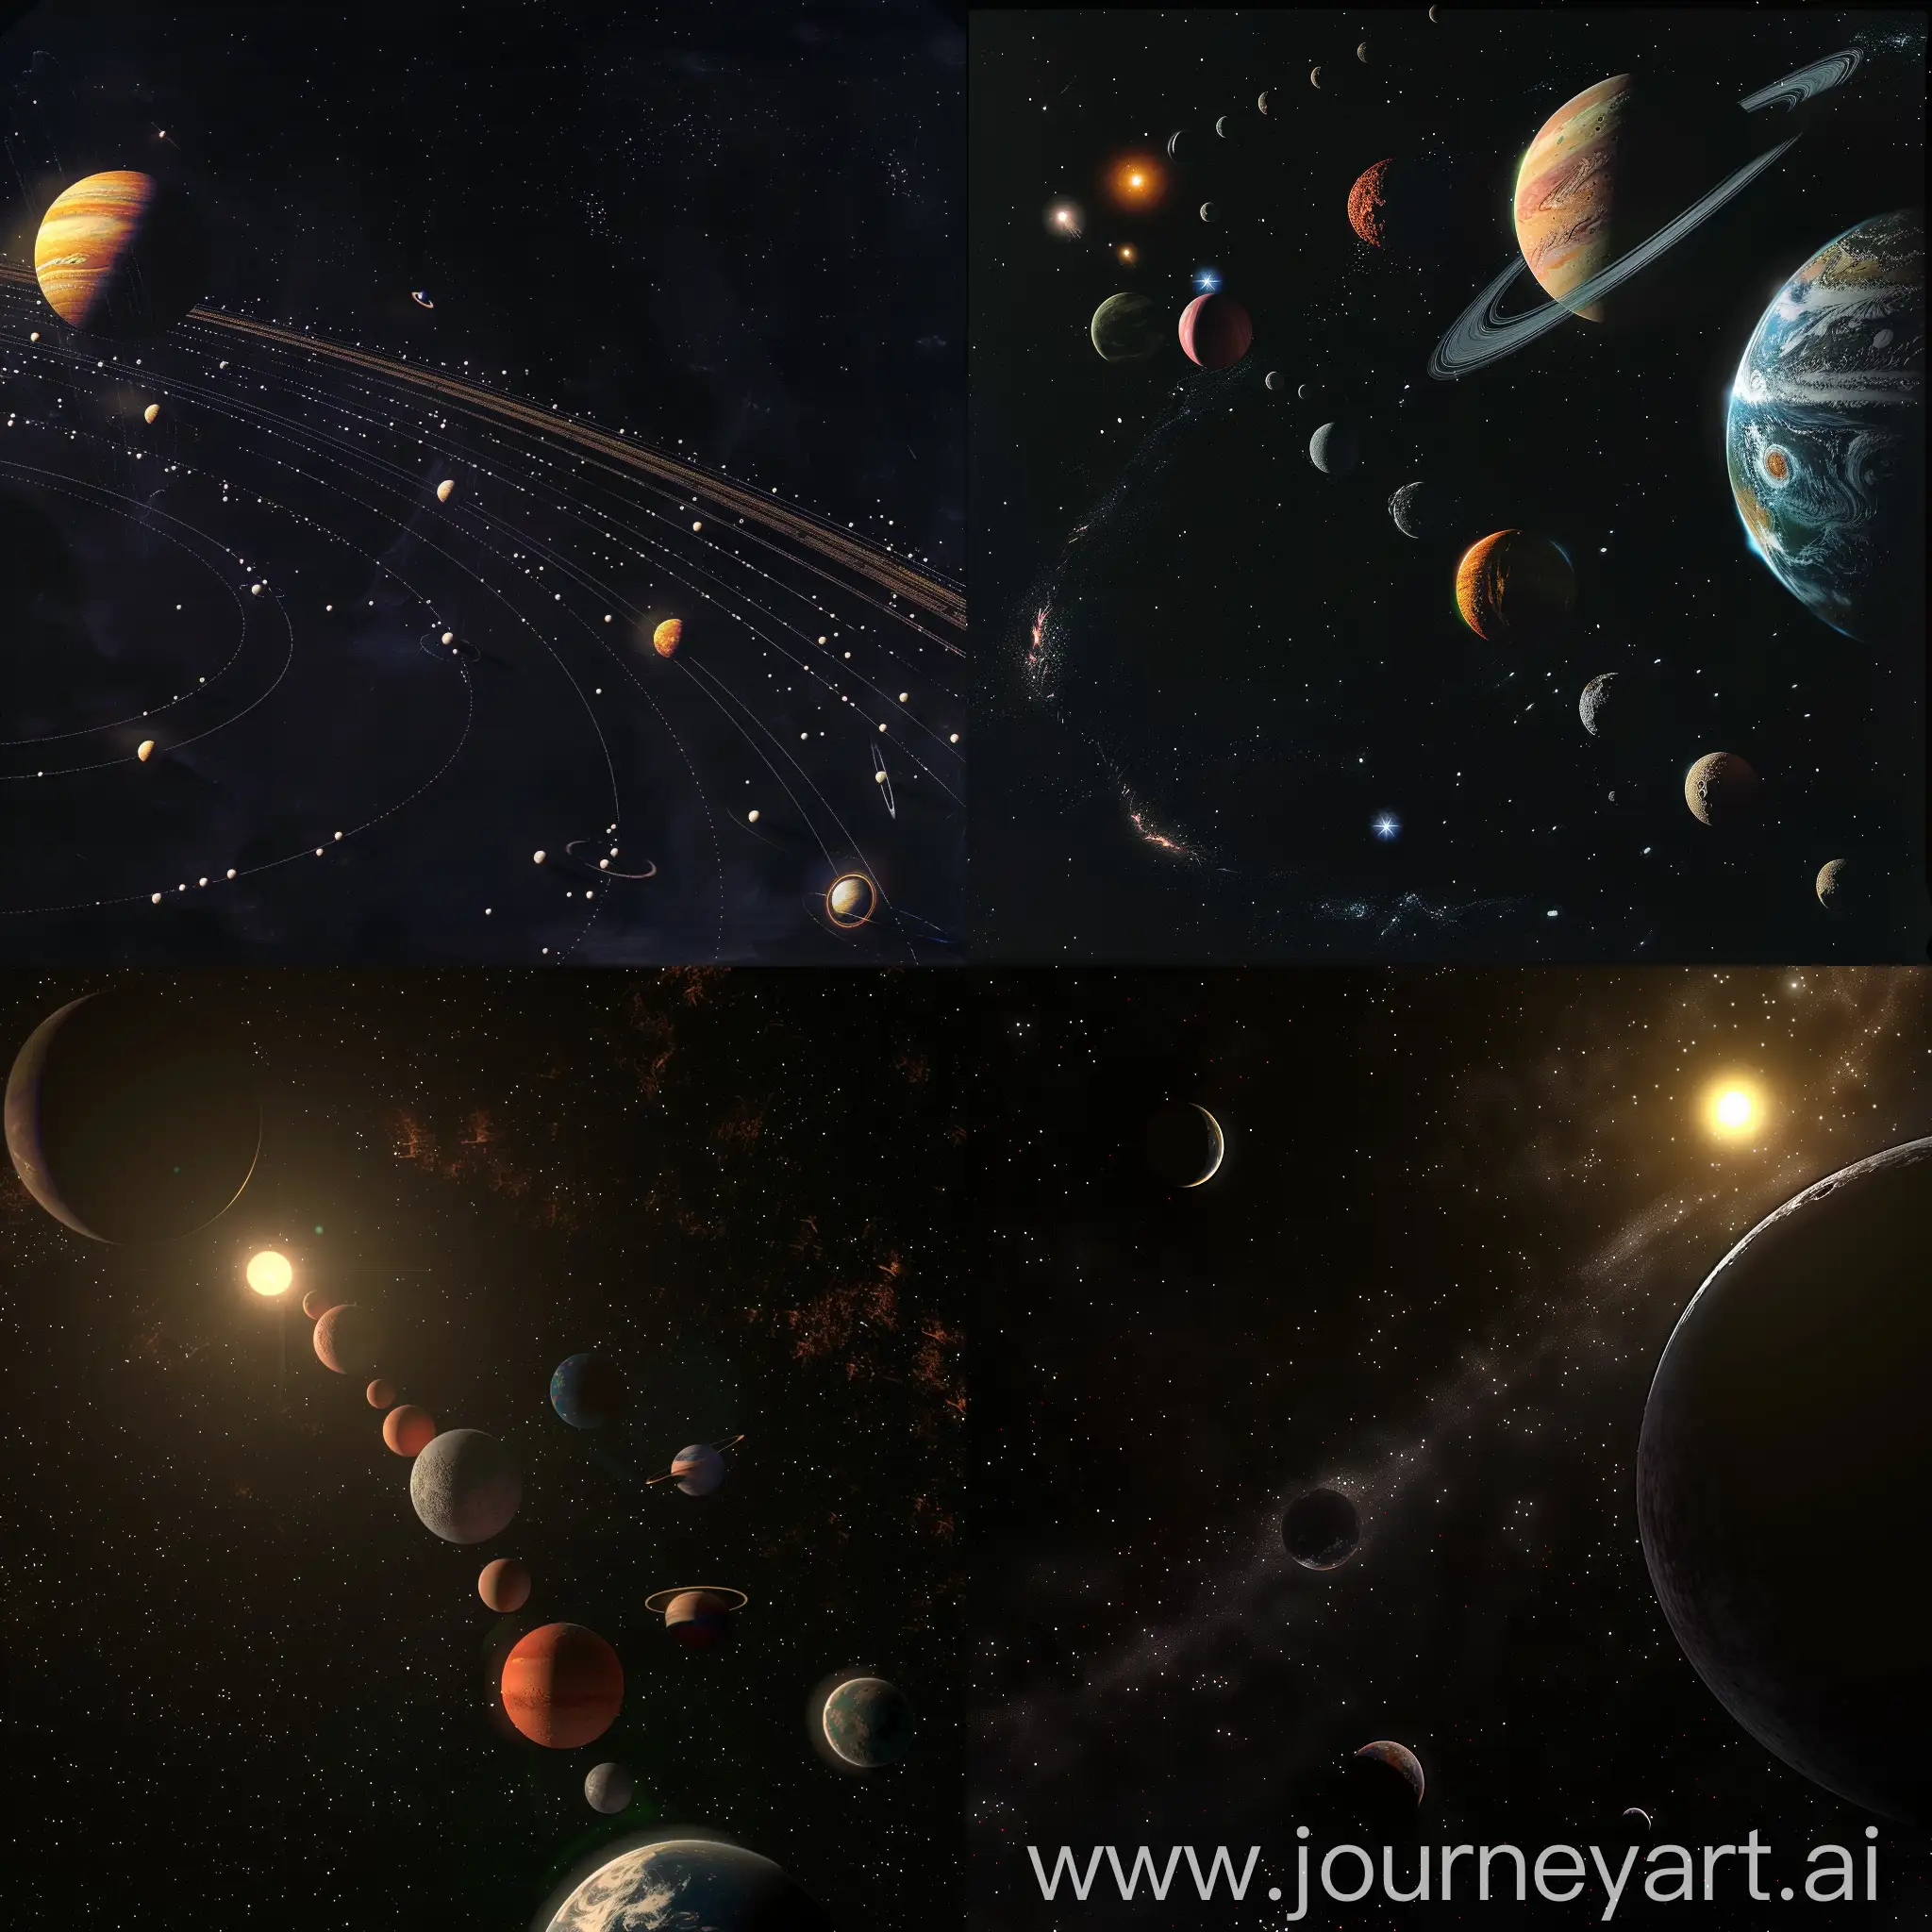 Vibrant-Planetary-System-with-Developed-Planets